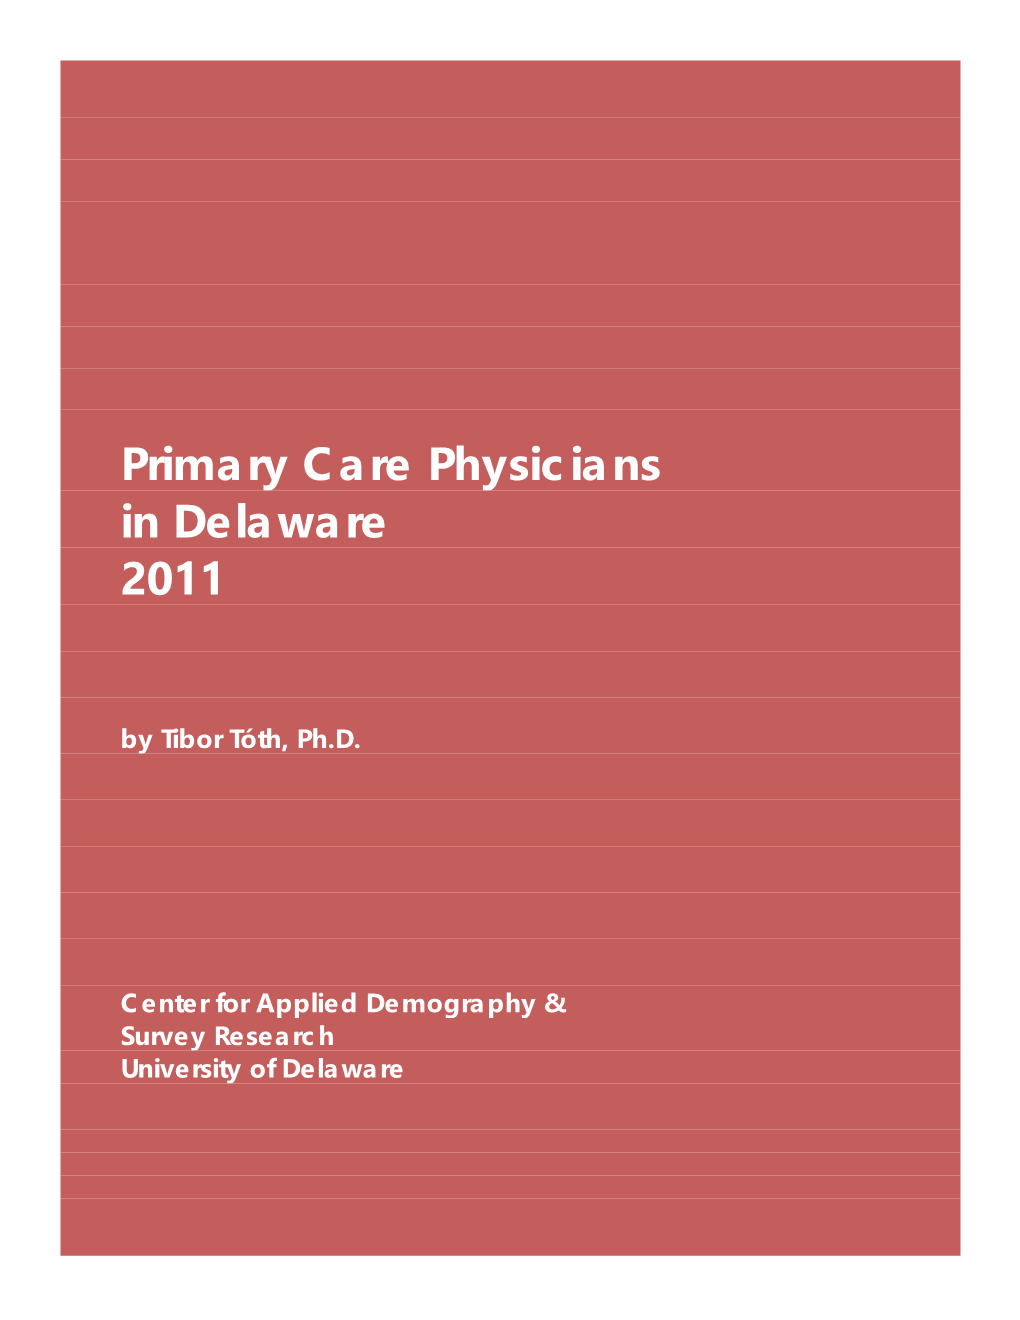 Primary Care Physicians in Delaware 2011